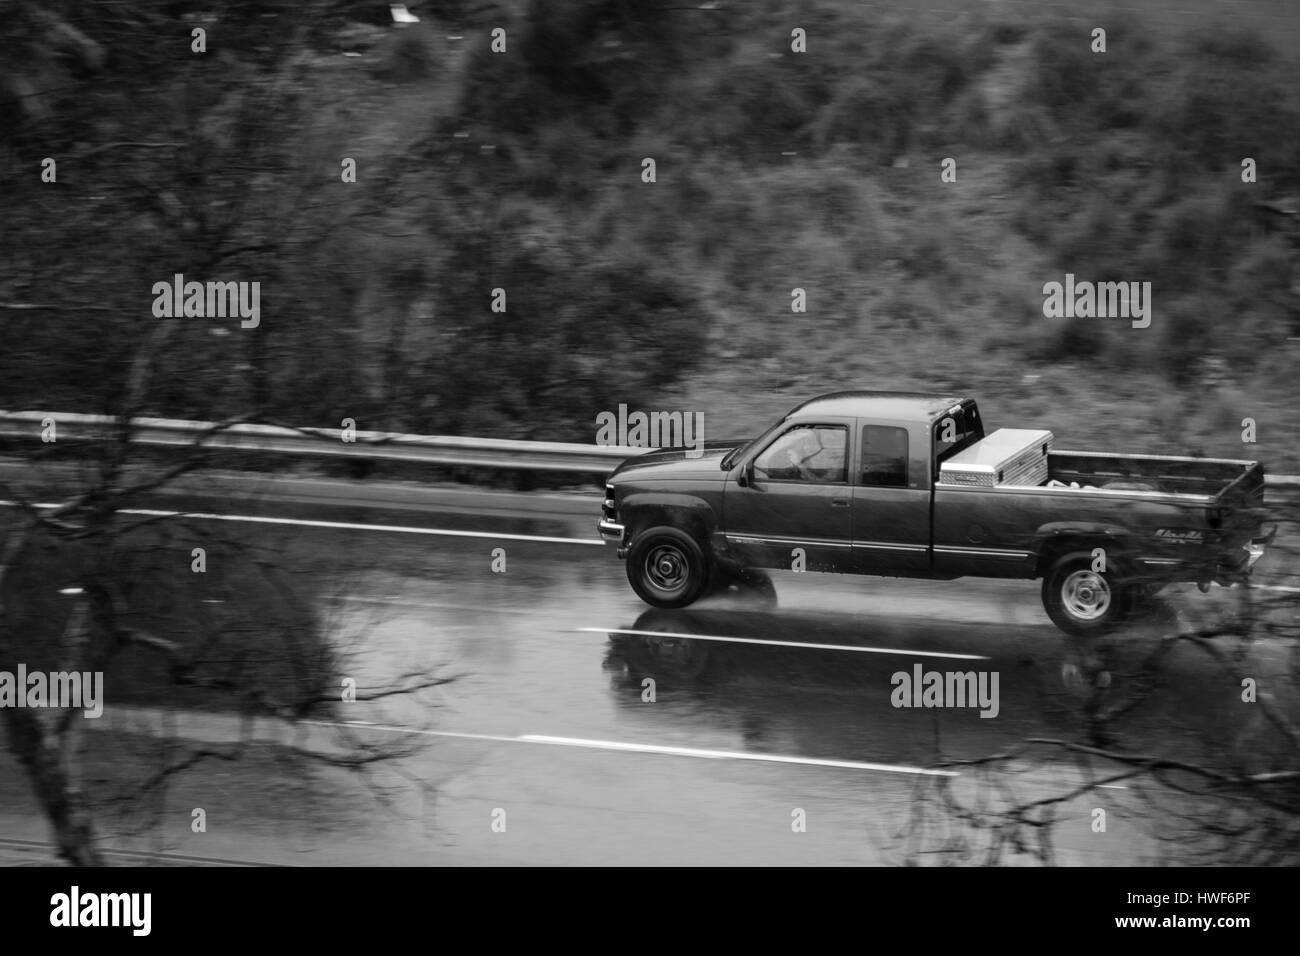 San Diego 27 Feb, 2017. beautiful rainy day in La Mesa, car going fast on a road full of water. Stock Photo